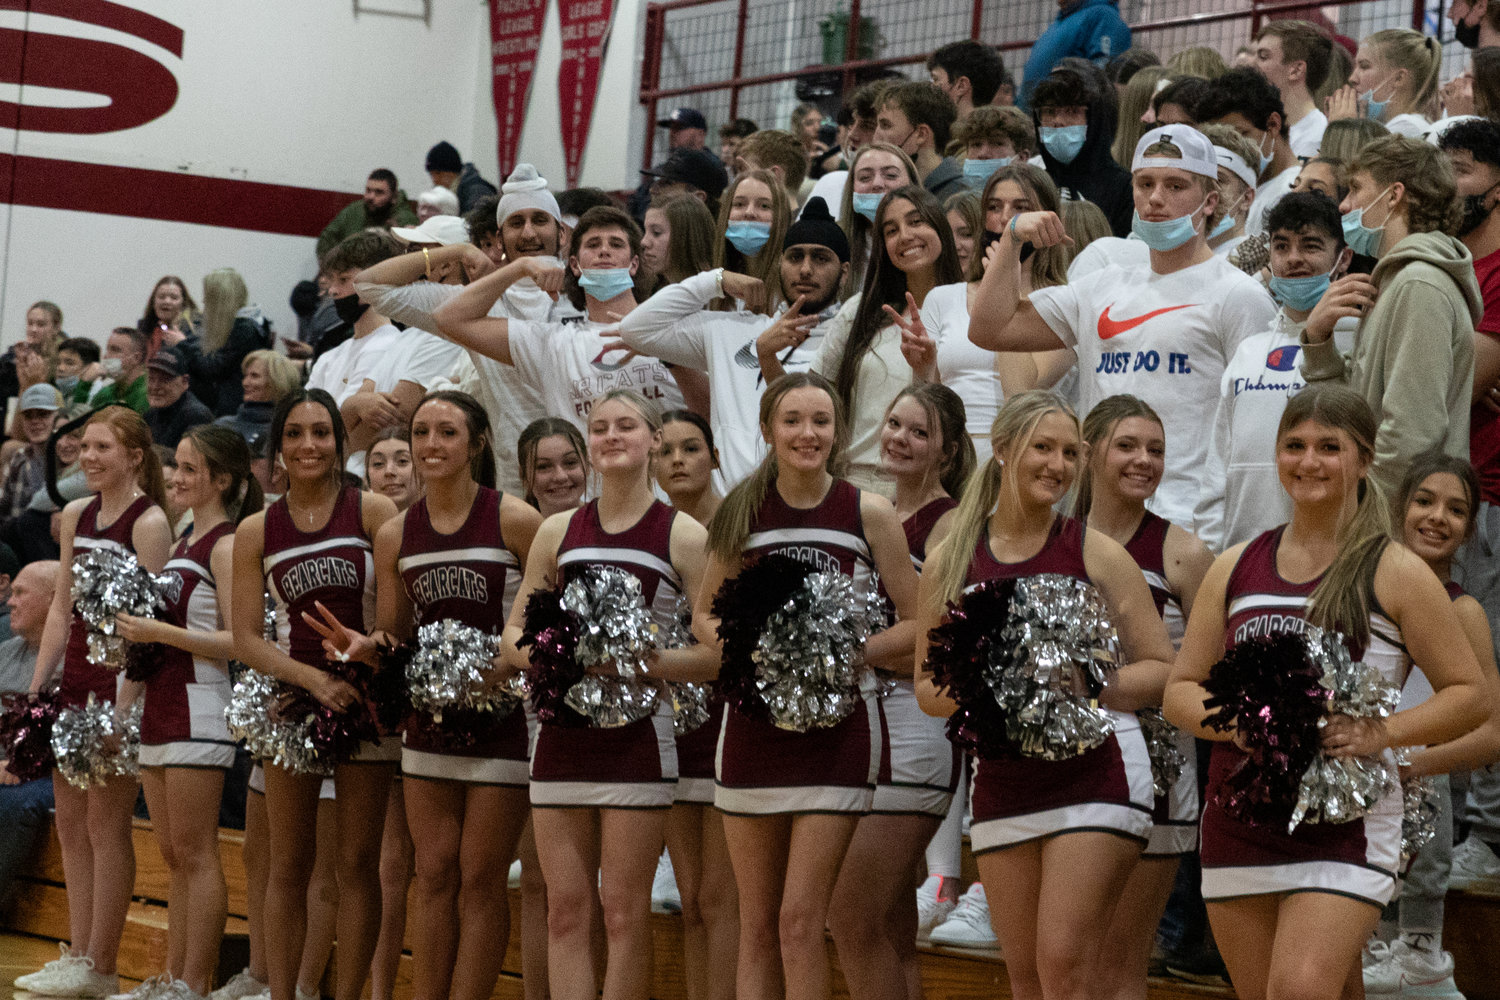 W.F. West's student section poses for a photo during the Swamp Cup game against Centralia Jan. 5.